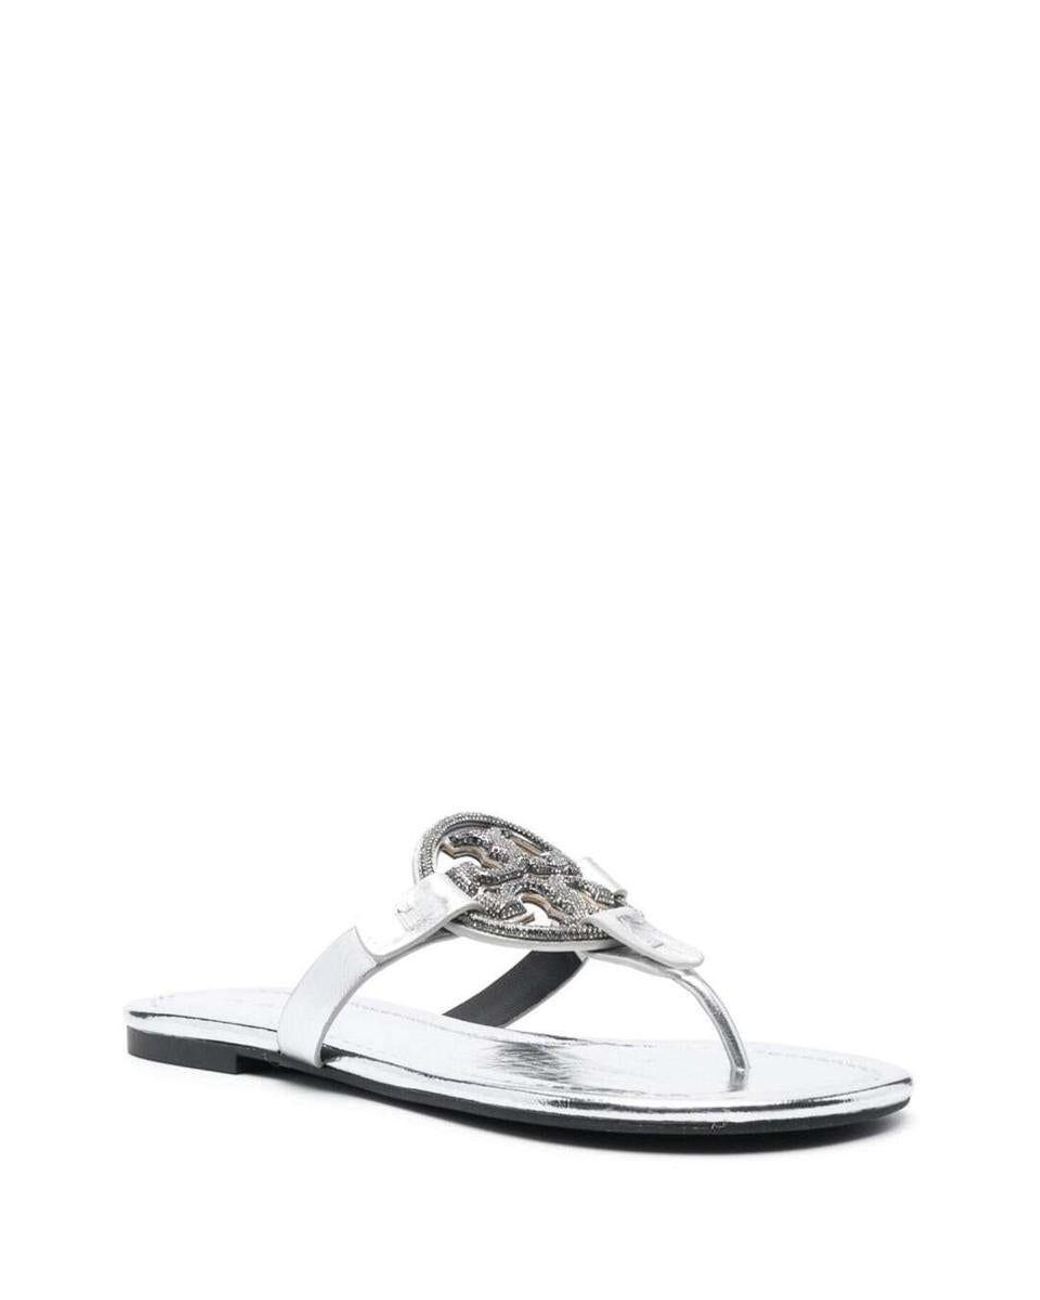 Tory Burch 'miller Pave' Sandals in White | Lyst